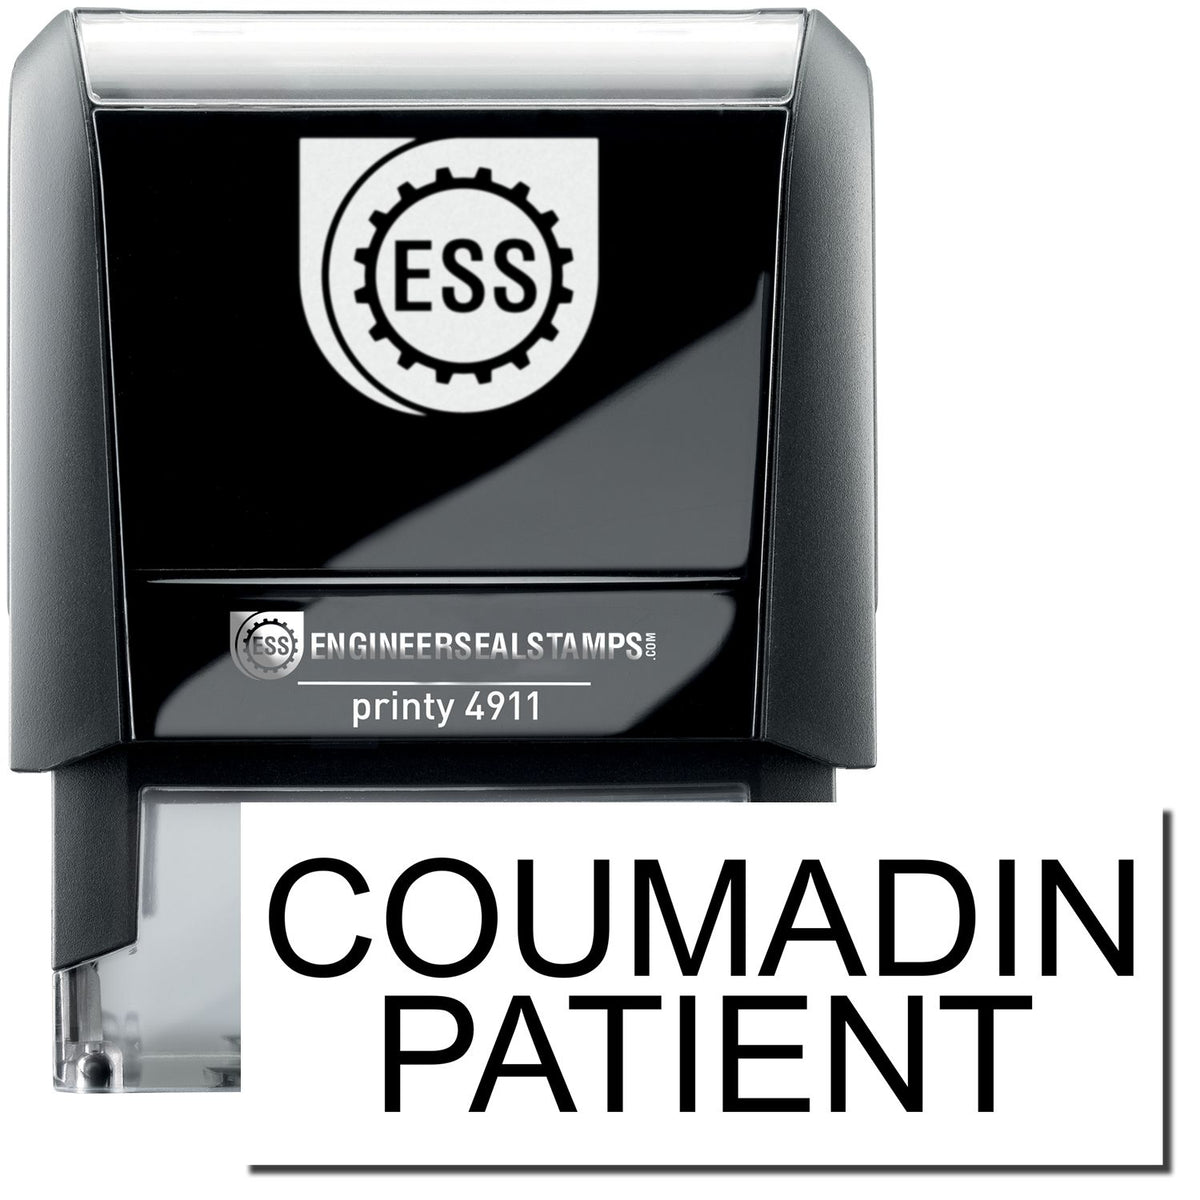 A self-inking stamp with a stamped image showing how the text &quot;COUMADIN PATIENT&quot; is displayed after stamping.